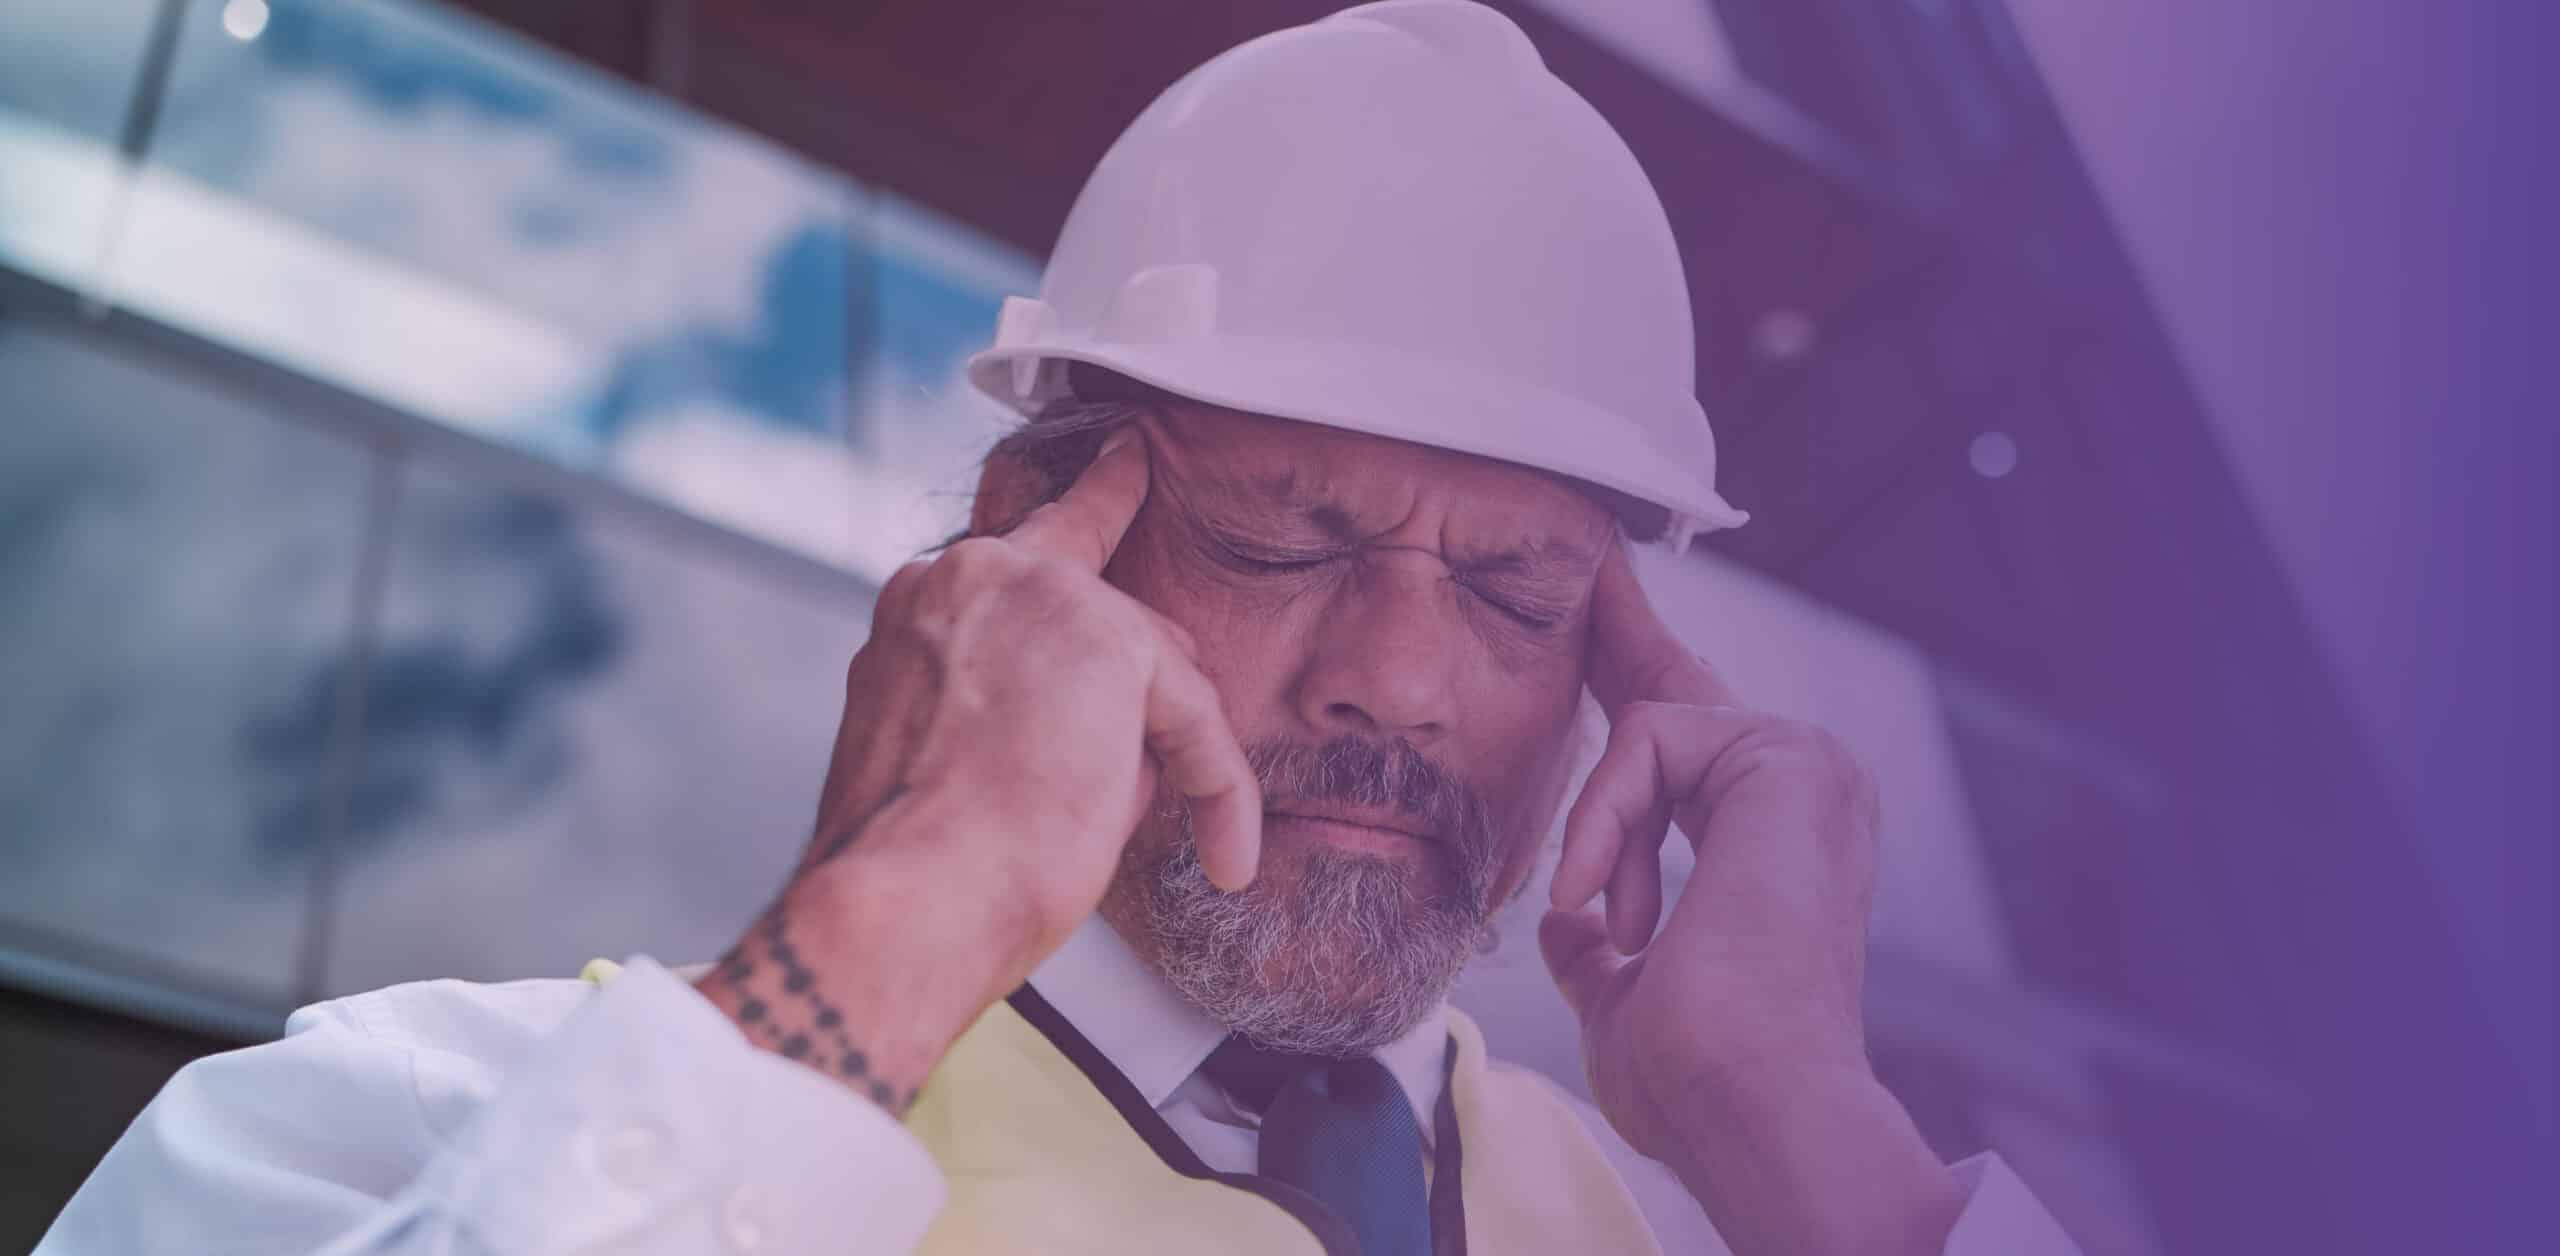 Construction worker with fingers on temples thinking